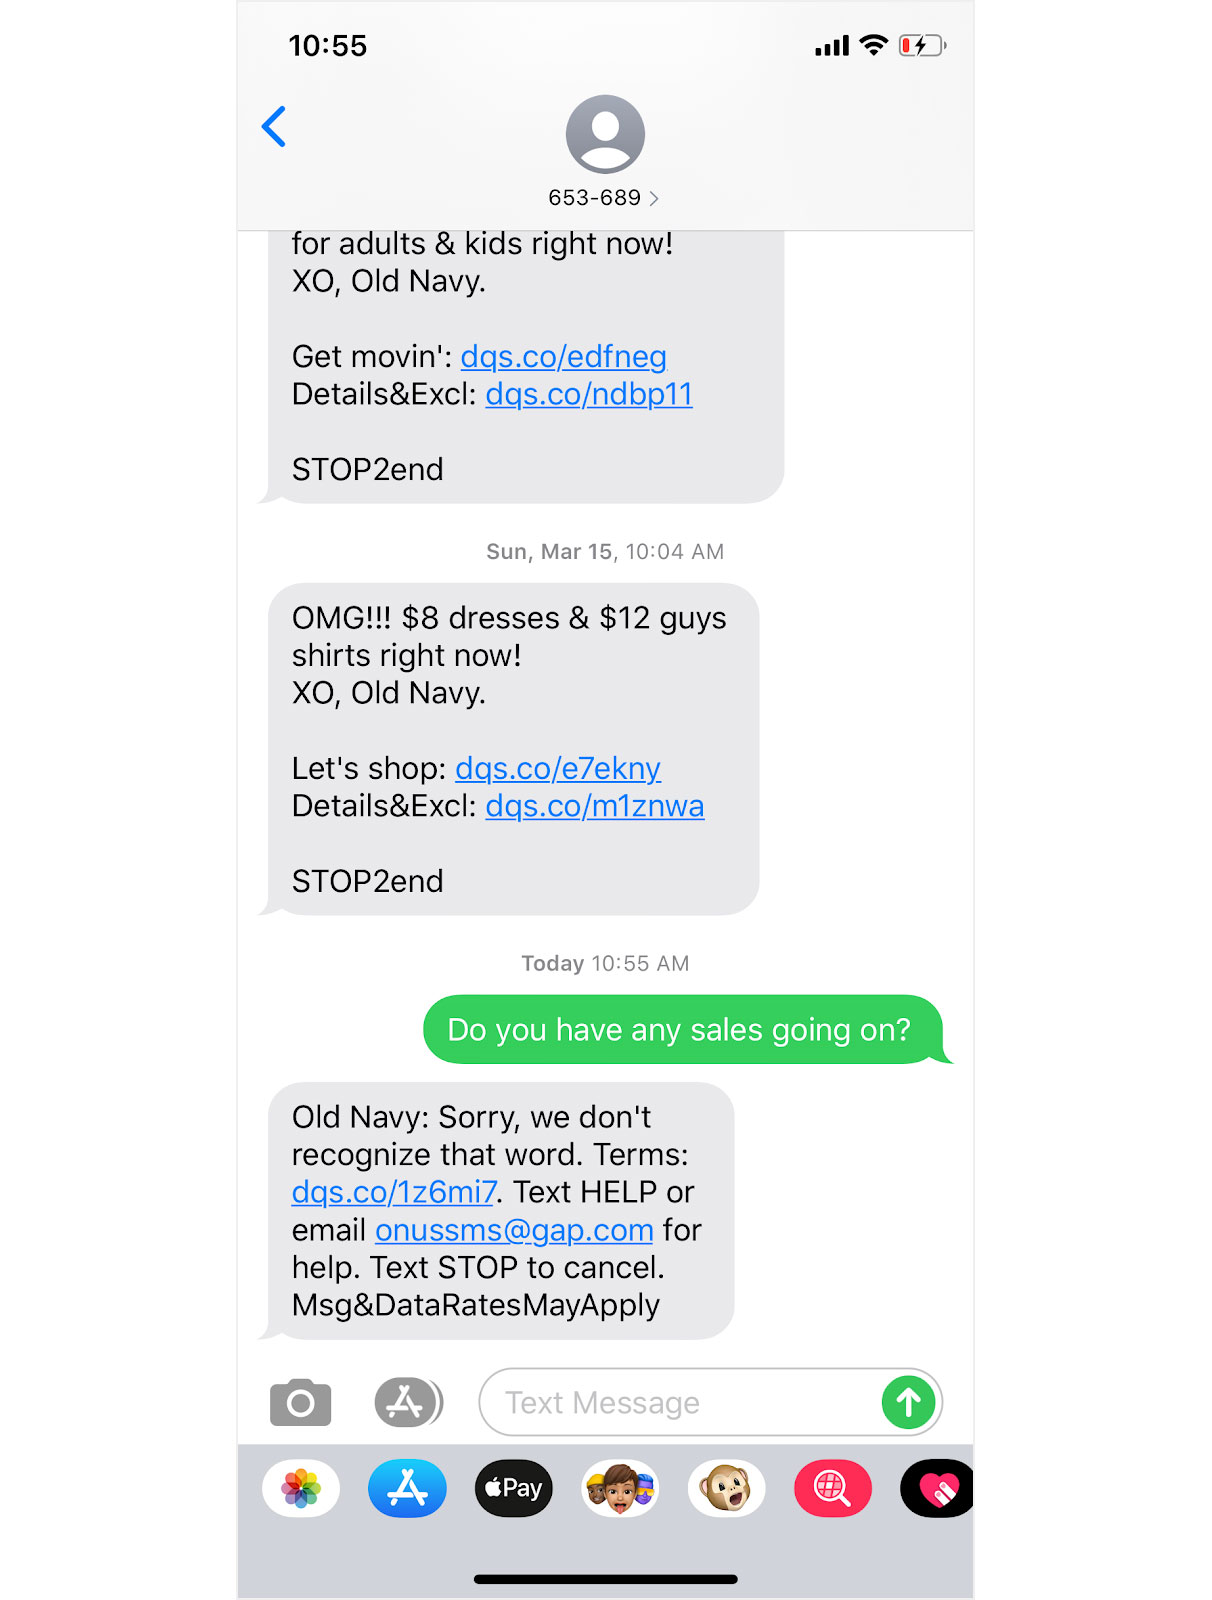 While it’s helpful that Old Navy sets up an auto-responder for inbound texts, imagine the delight if a customer actually got the information they needed as a response.